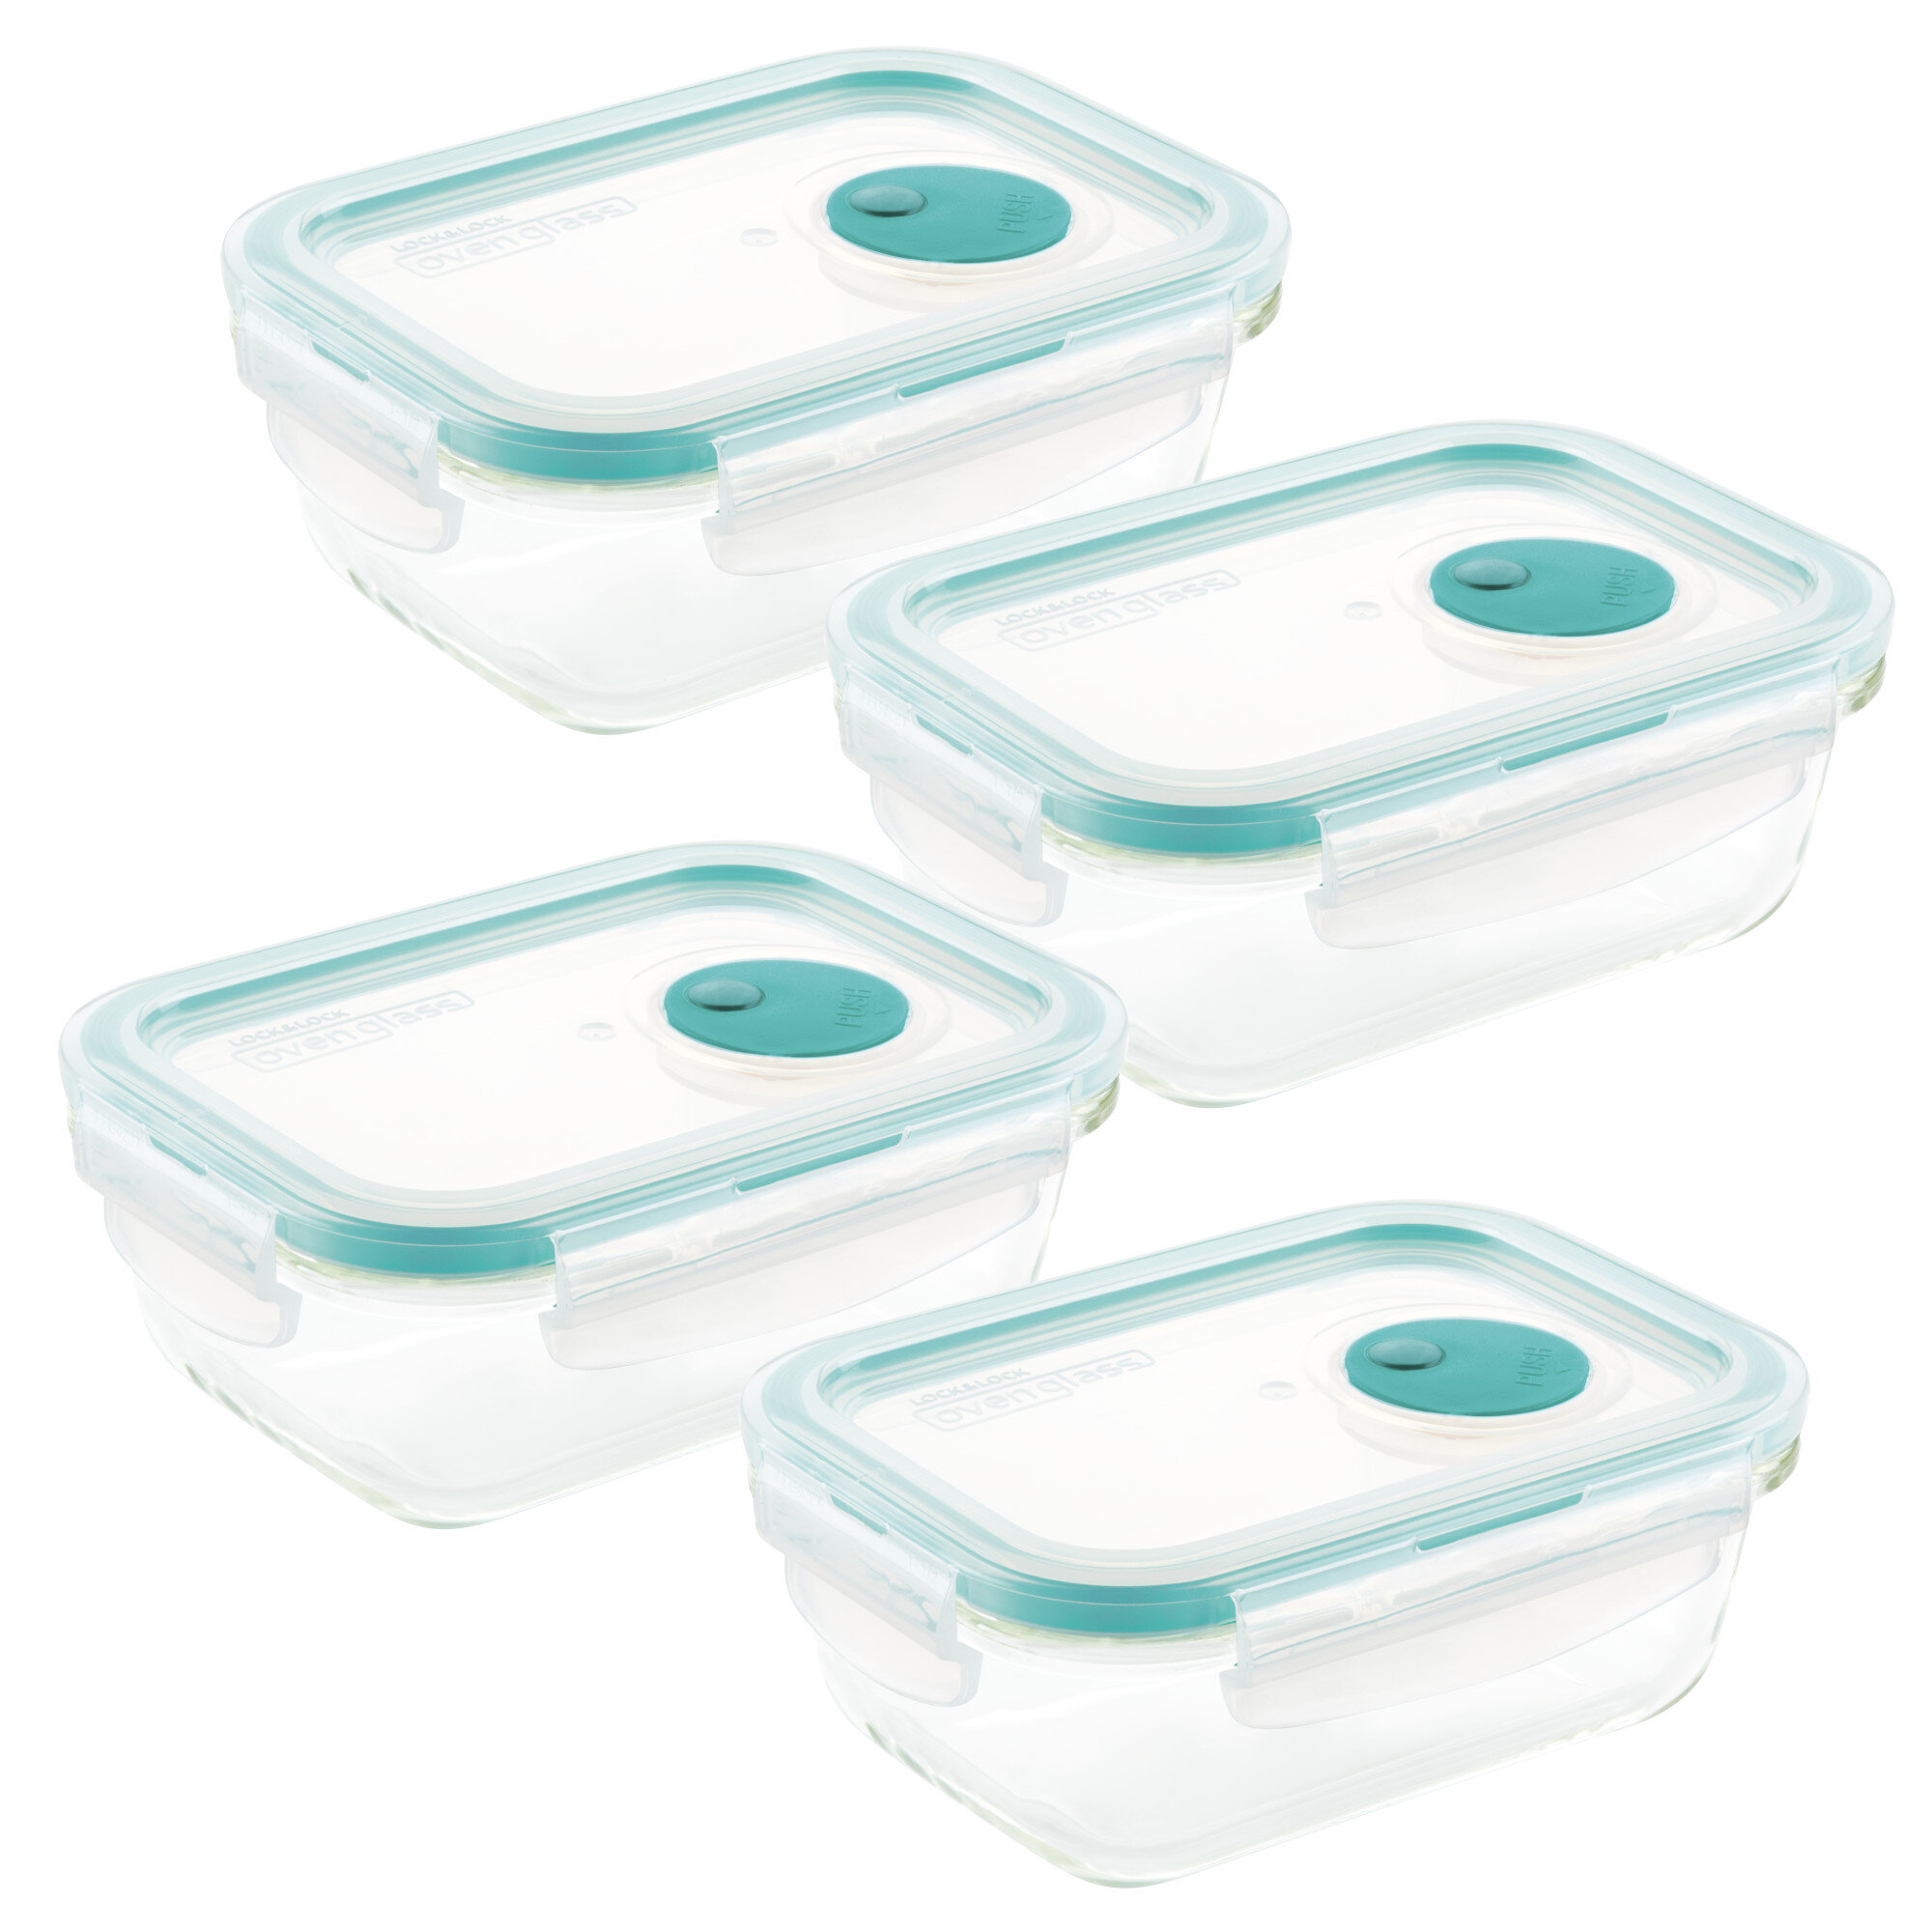 Anchor Hocking Clear Glass Food Storage Containers with TrueSeal Lids, 19 Piece Set